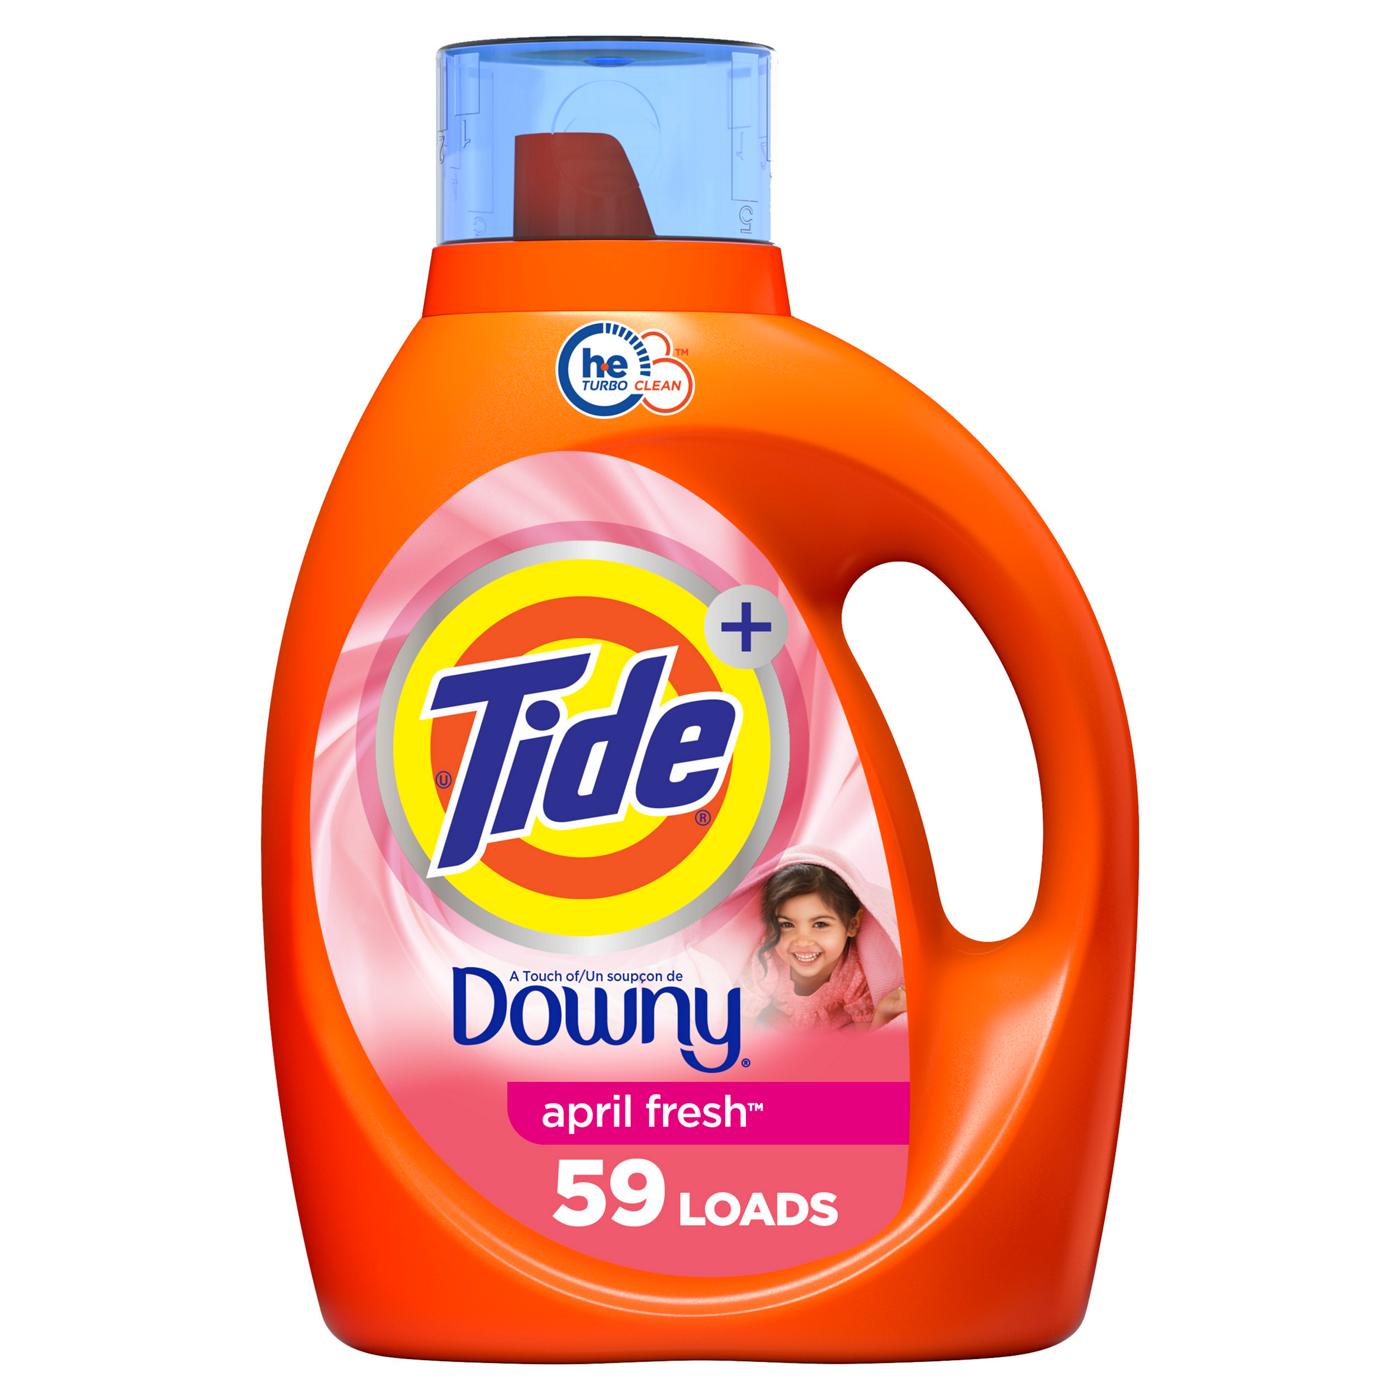 Tide + Downy HE Turbo Clean Liquid Laundry Detergent, 59 Loads -  April Fresh; image 1 of 10